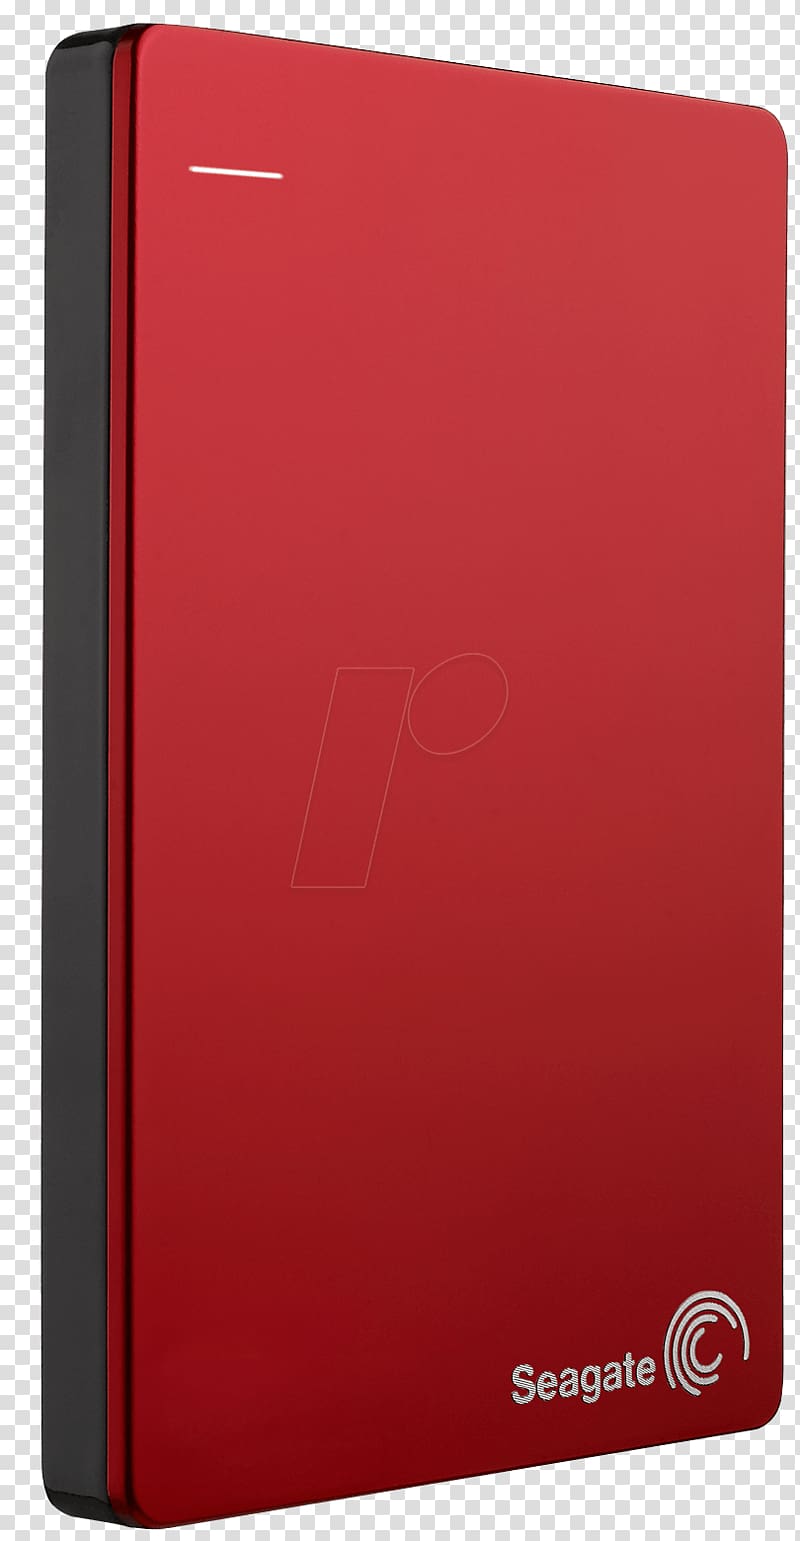 Hard Drives Seagate Backup Plus Portable HDD Seagate Backup Plus Slim Portable HDD Seagate Technology Terabyte, others transparent background PNG clipart